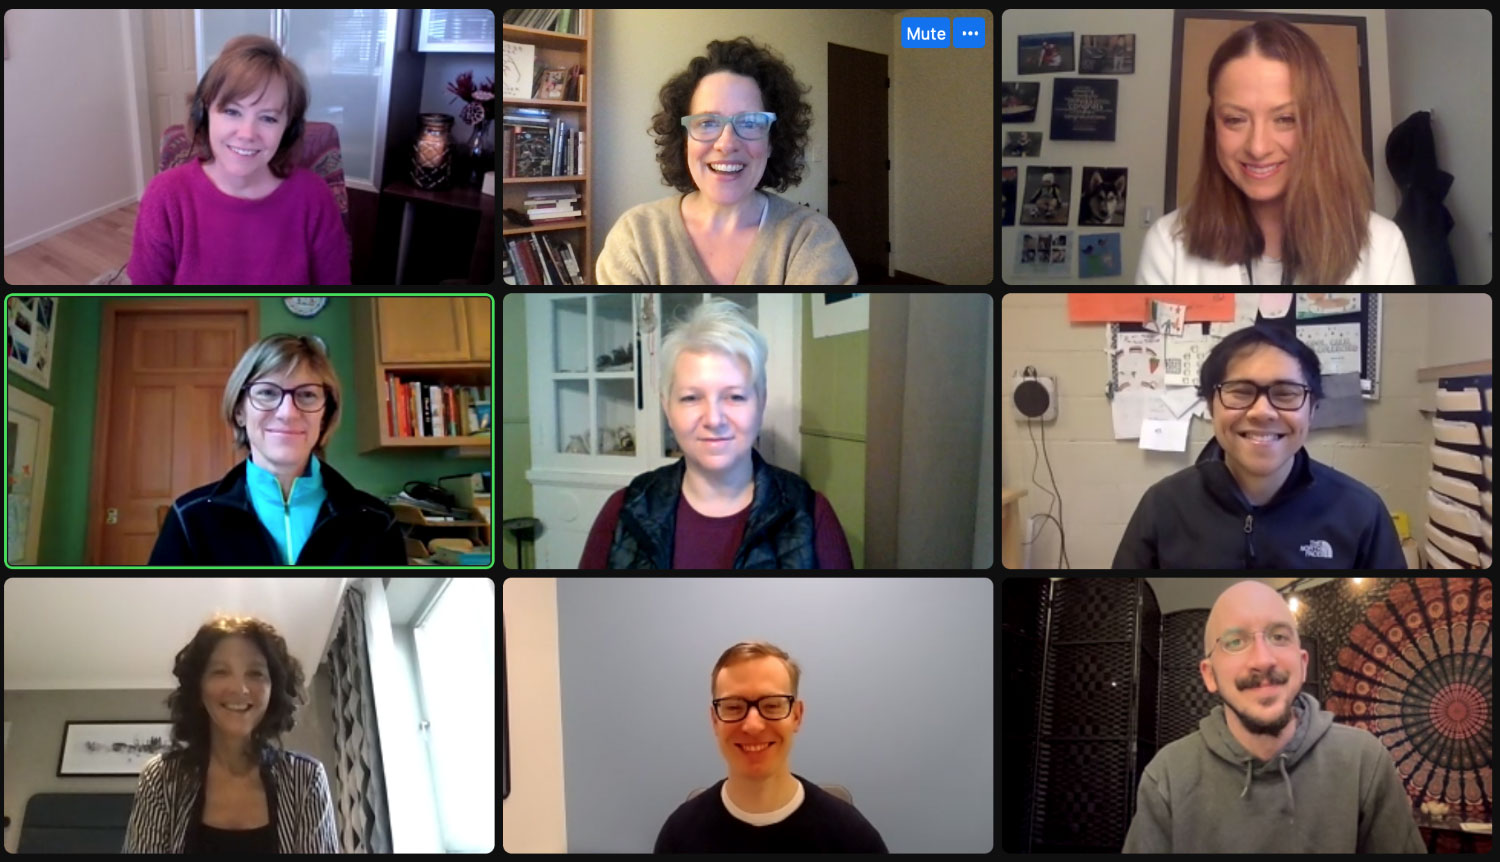 A screenshot of 9 people on zoom, smiling and talking about mindfulness.